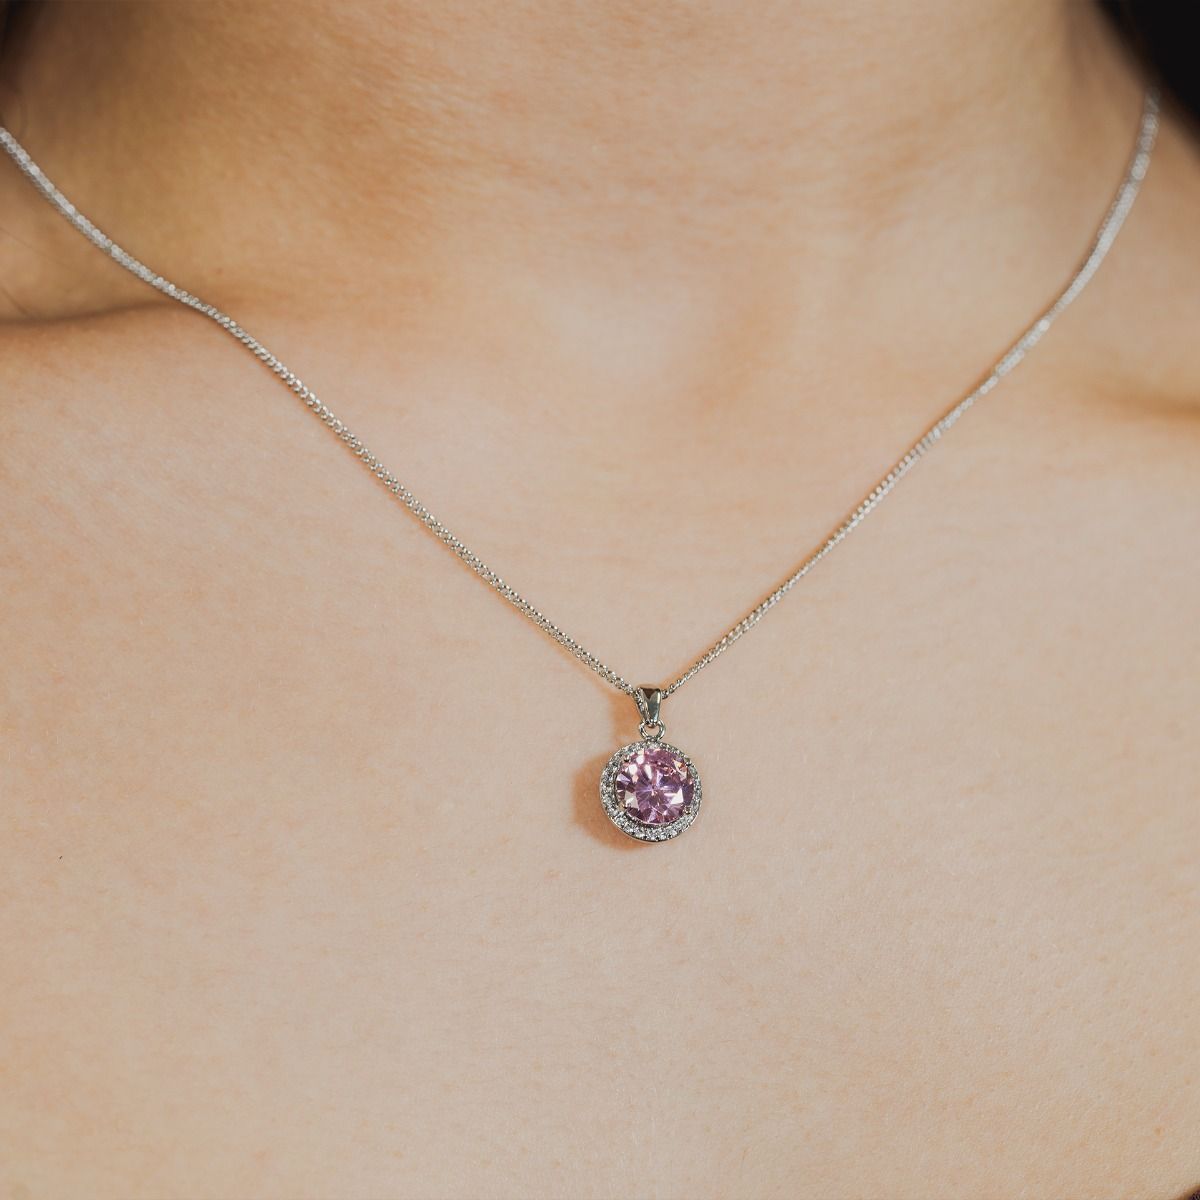 Experience enchantment through our Pink Halo Pendant. The impressive round-cut centre stone emanates a captivating allure. Effortlessly elevate your style with this exquisite piece, infusing timeless glamour into any ensemble.